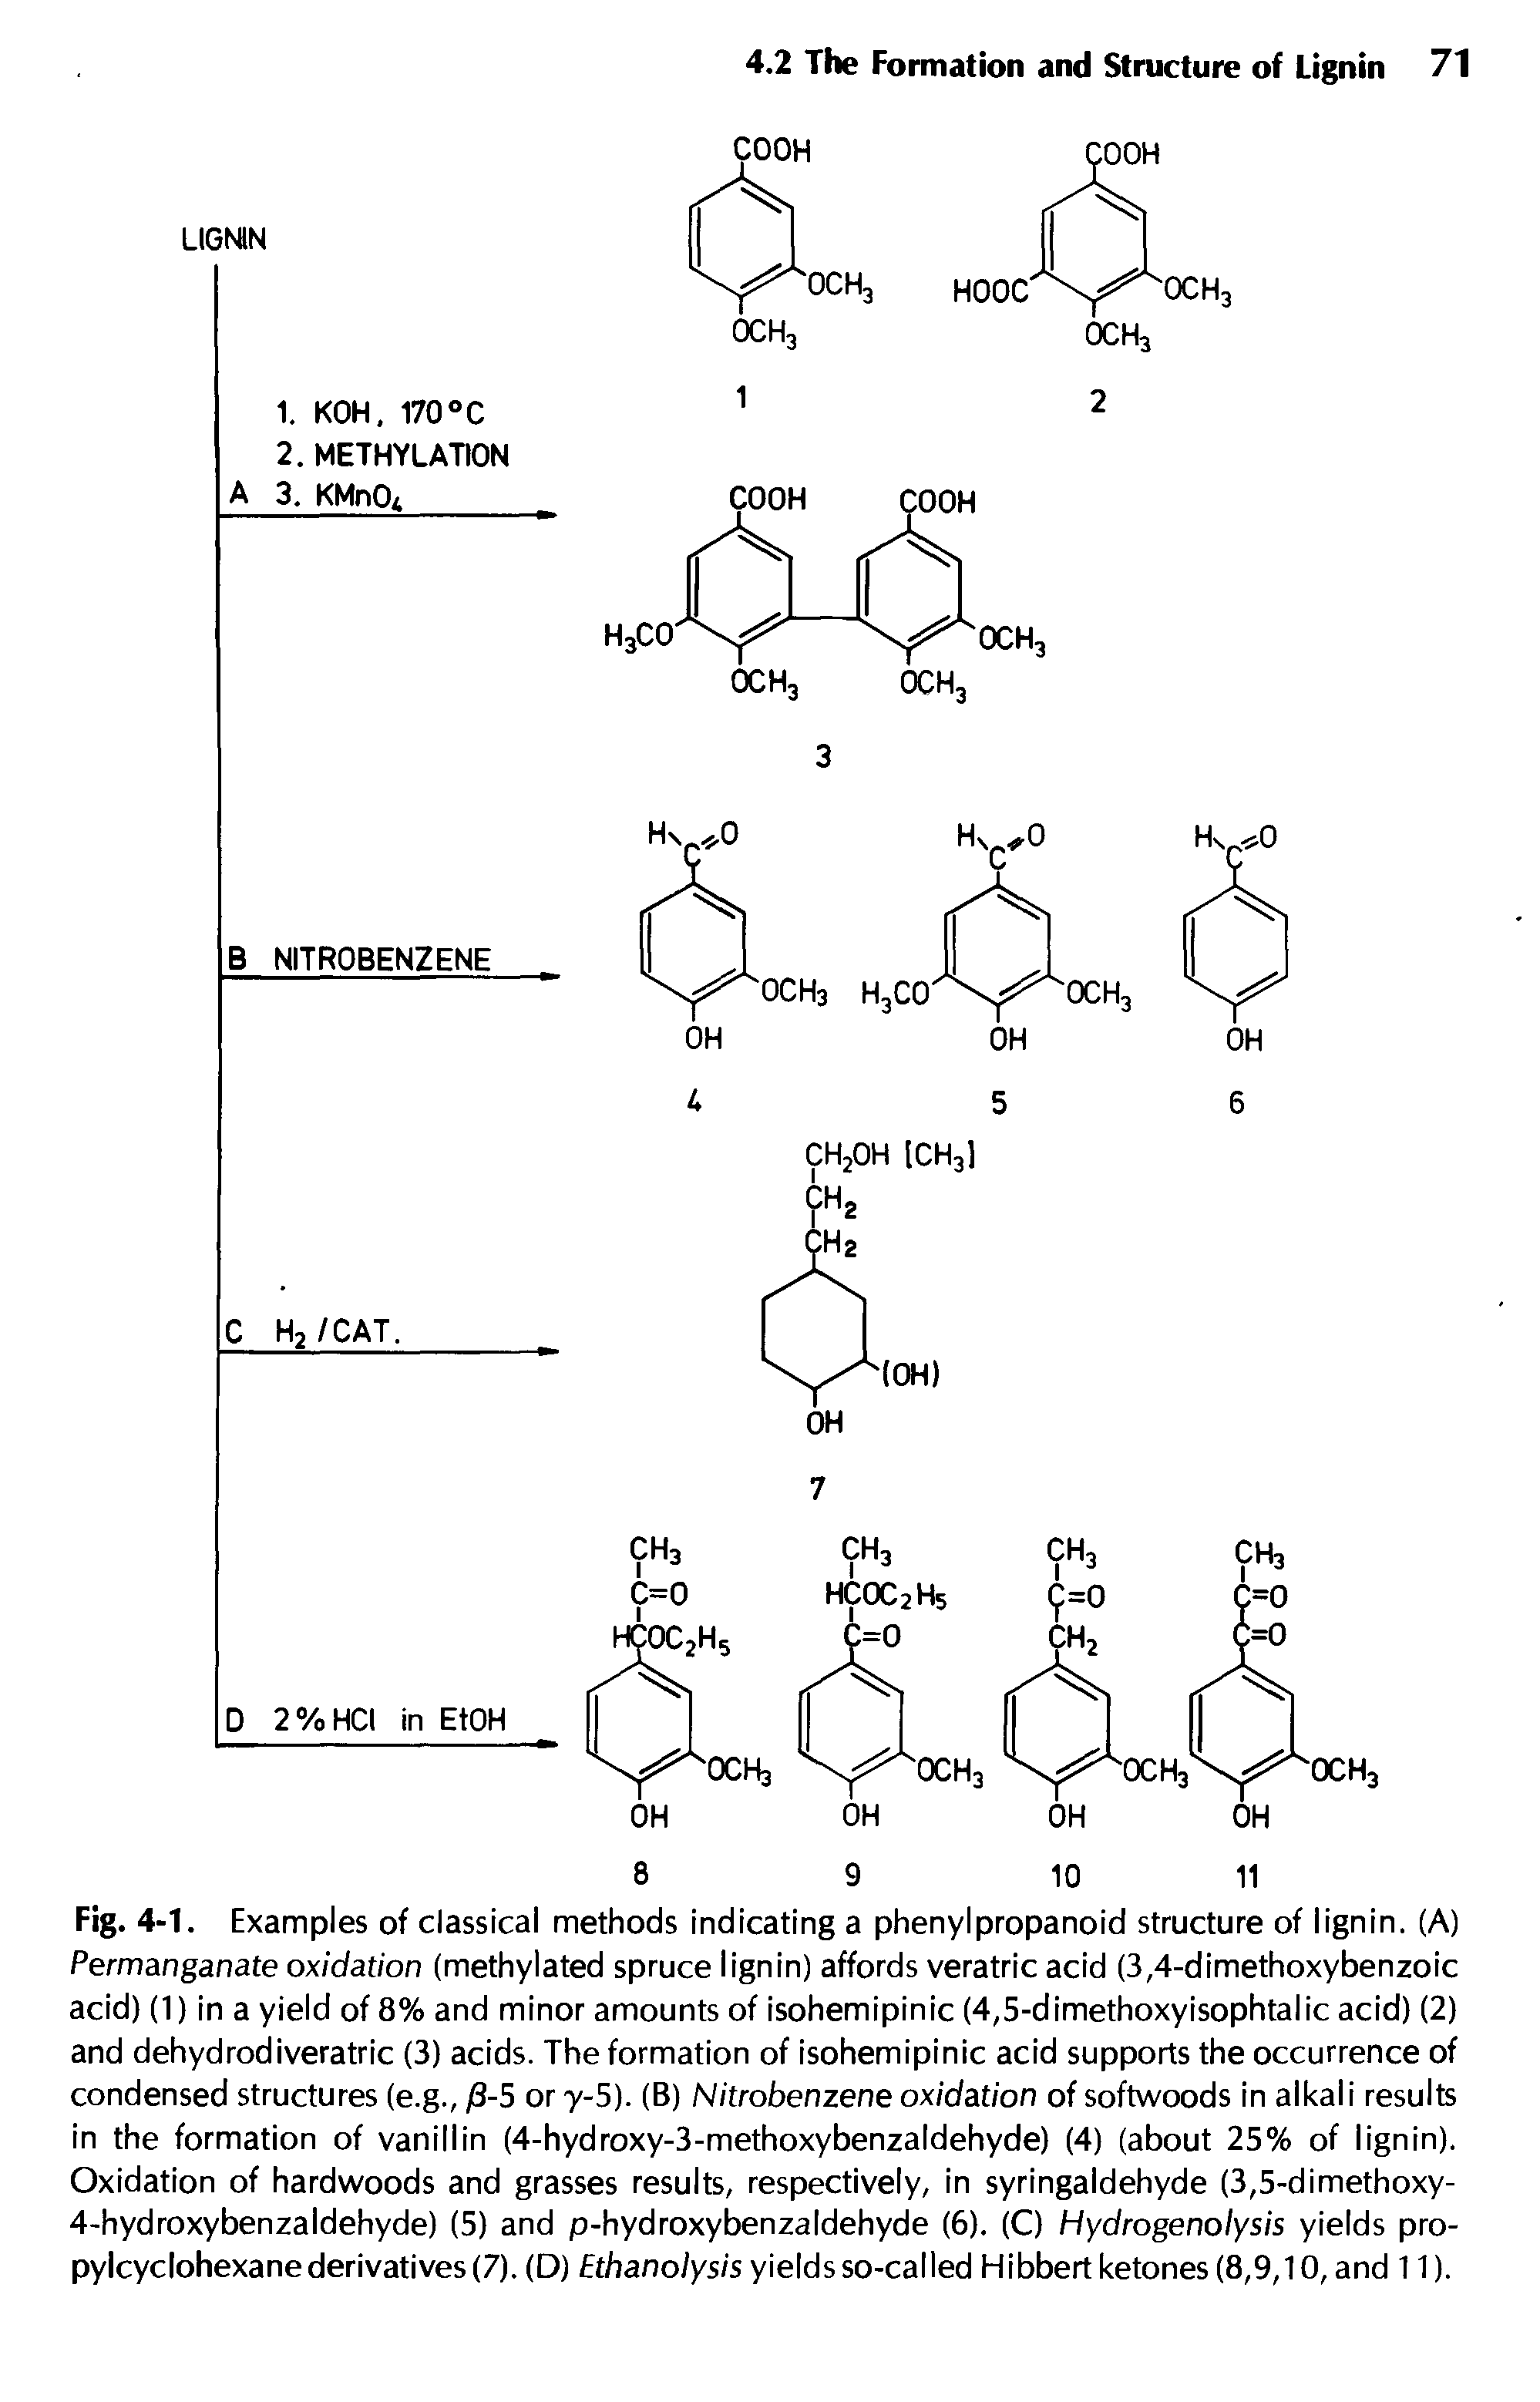 Fig. 4-1. Examples of classical methods indicating a phenylpropanoid structure of lignin. (A) Permanganate oxidation (methylated spruce lignin) affords veratric acid (3,4-dimethoxybenzoic acid) (1) in a yield of 8% and minor amounts of isohemipinic (4,5-dimethoxyisophtalic acid) (2) and dehydrodiveratric (3) acids. The formation of isohemipinic acid supports the occurrence of condensed structures (e.g., /3-5 or y-5). (B) Nitrobenzene oxidation of softwoods in alkali results in the formation of vanillin (4-hydroxy-3-methoxybenzaldehyde) (4) (about 25% of lignin). Oxidation of hardwoods and grasses results, respectively, in syringaldehyde (3,5-dimethoxy-4-hydroxybenzaldehyde) (5) and p-hydroxybenzaldehyde (6). (C) Hydrogenolysis yields pro-pylcyclohexane derivatives (7). (D) Ethanolysis yields so-called Hibbert ketones (8,9,10, and 11).